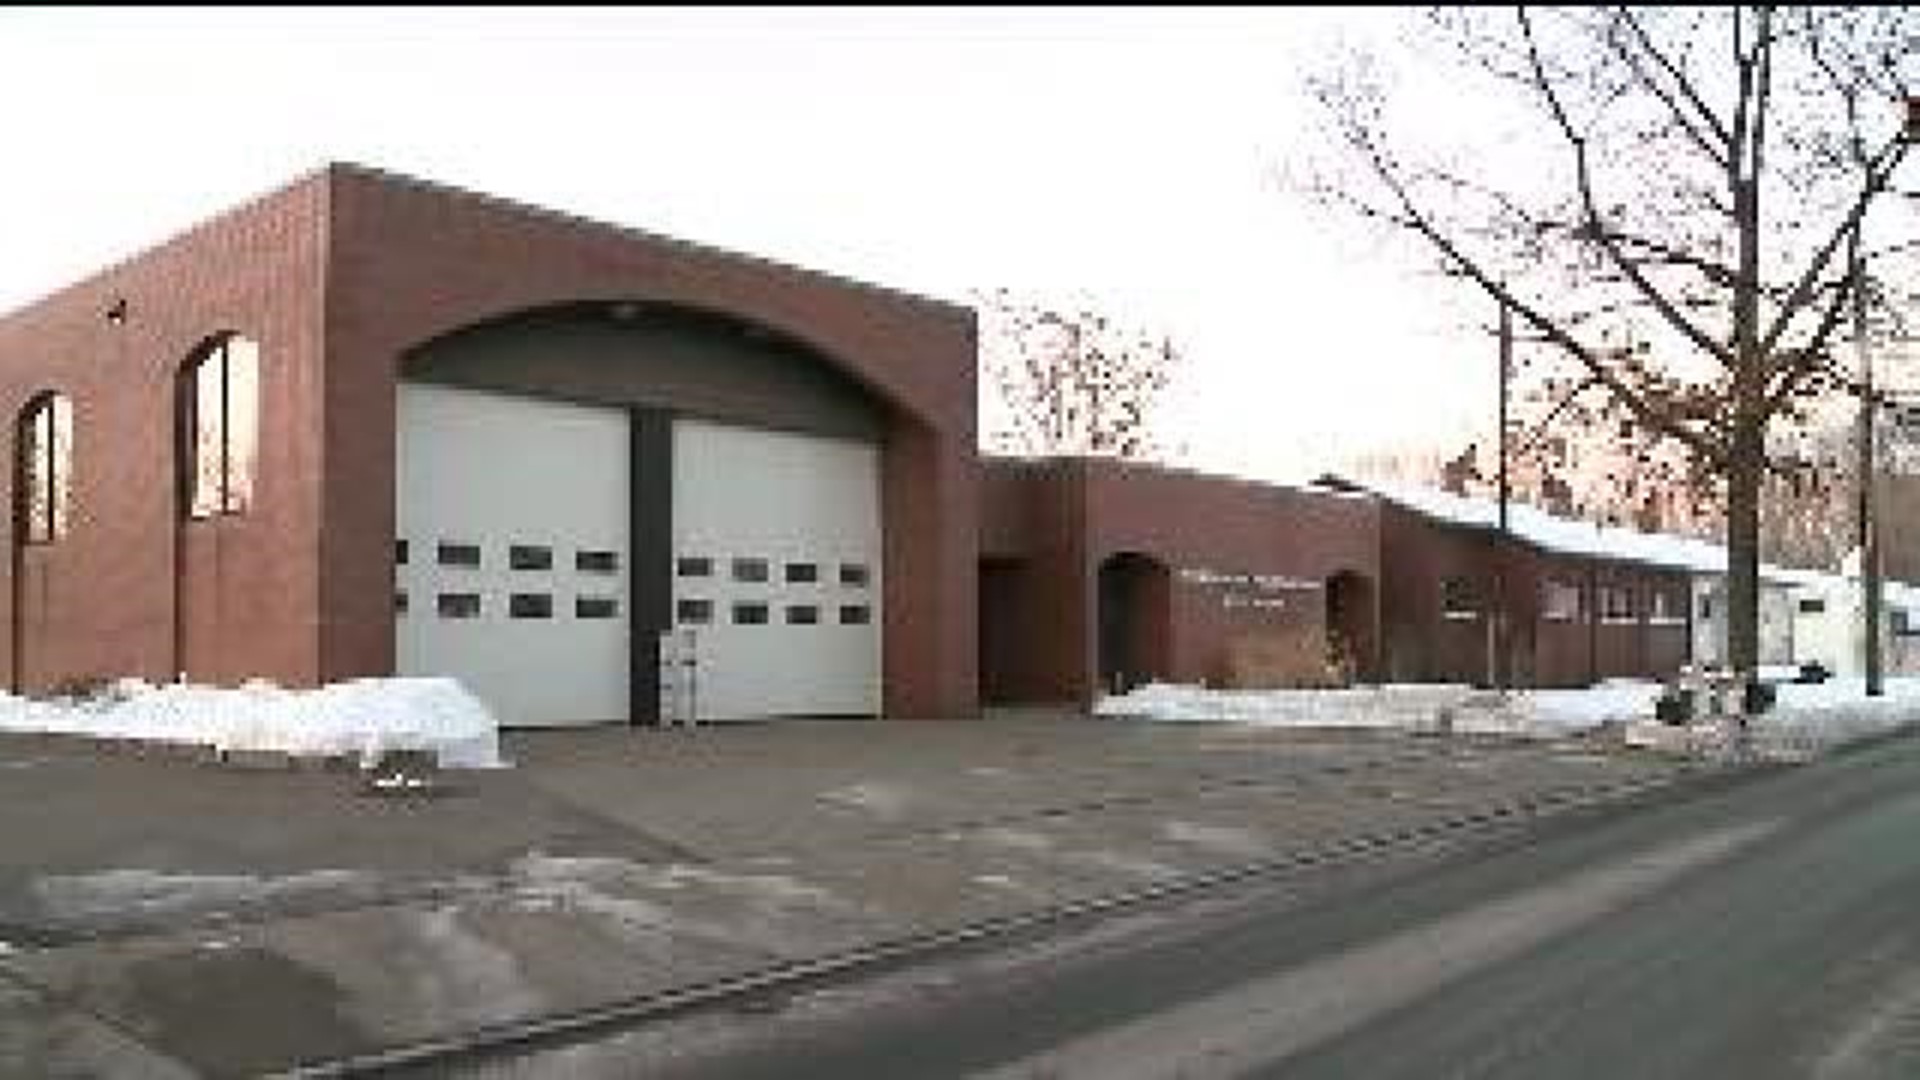 Grant Money For Firefighters in Wilkes-Barre